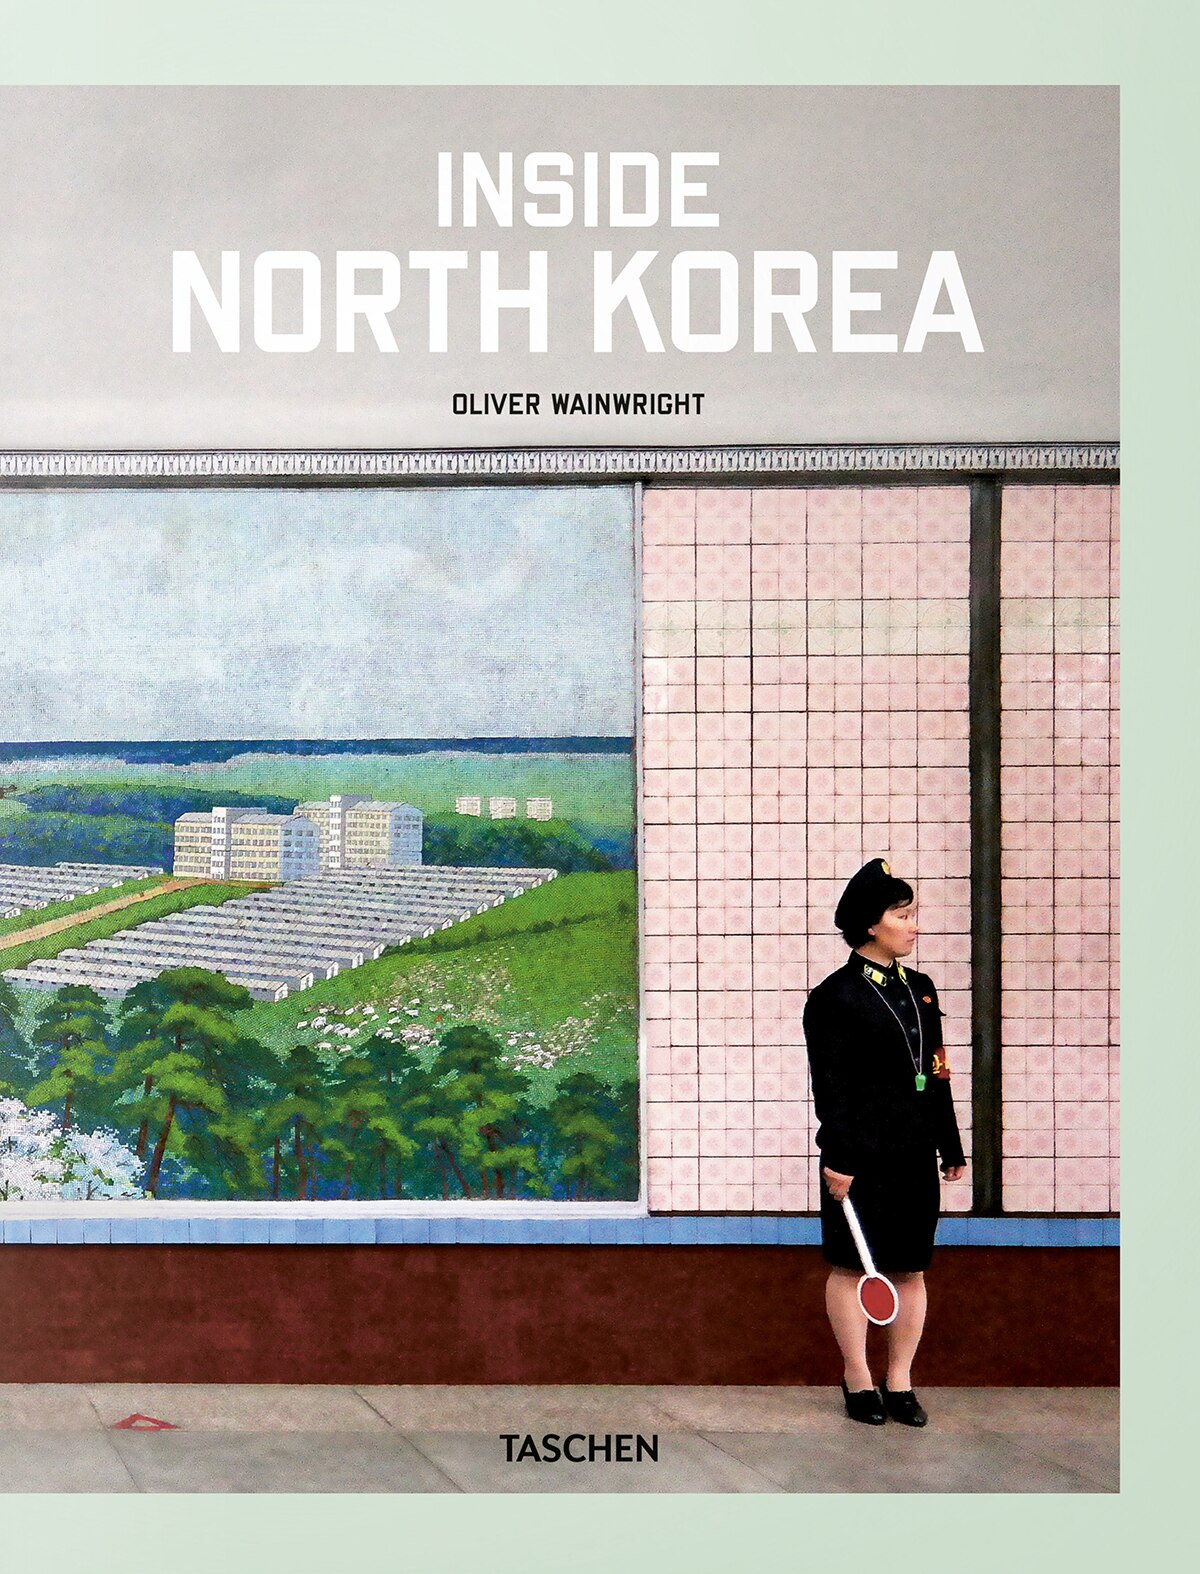 Colour scan of Insider North Korean book cover featuring a government worker standing in front of a pink tiled wall and mural.